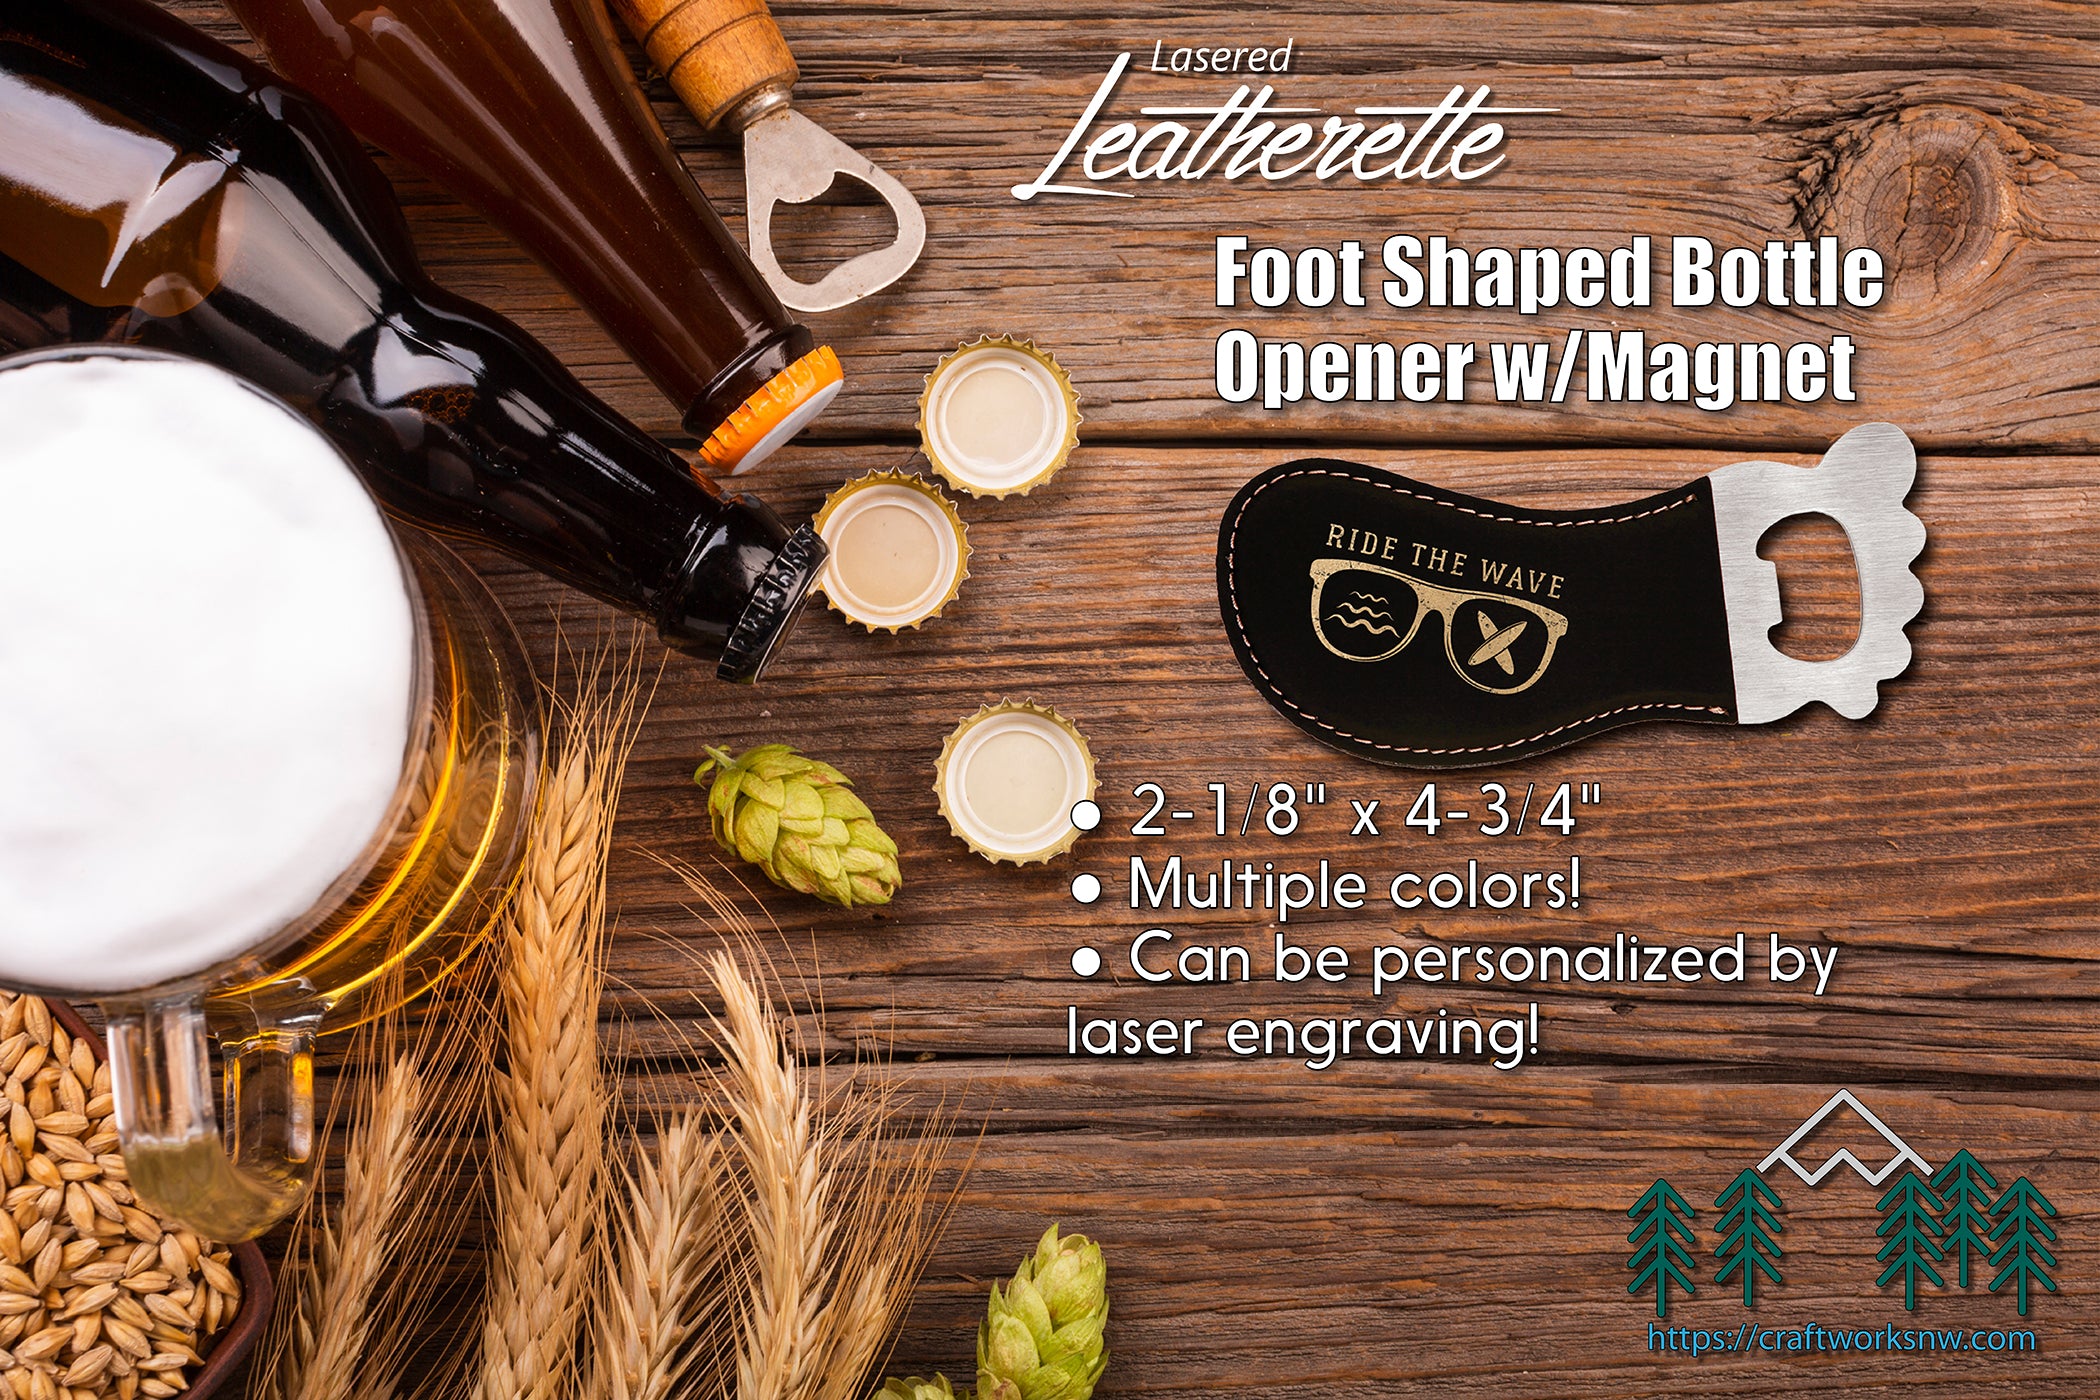 Foot Shaped Bottle Opener w/Magnet, Stainless Steel 2 1/8" x 4 3/4" Laserable Leatherette, Laser Engraved - Craftworks NW, LLC